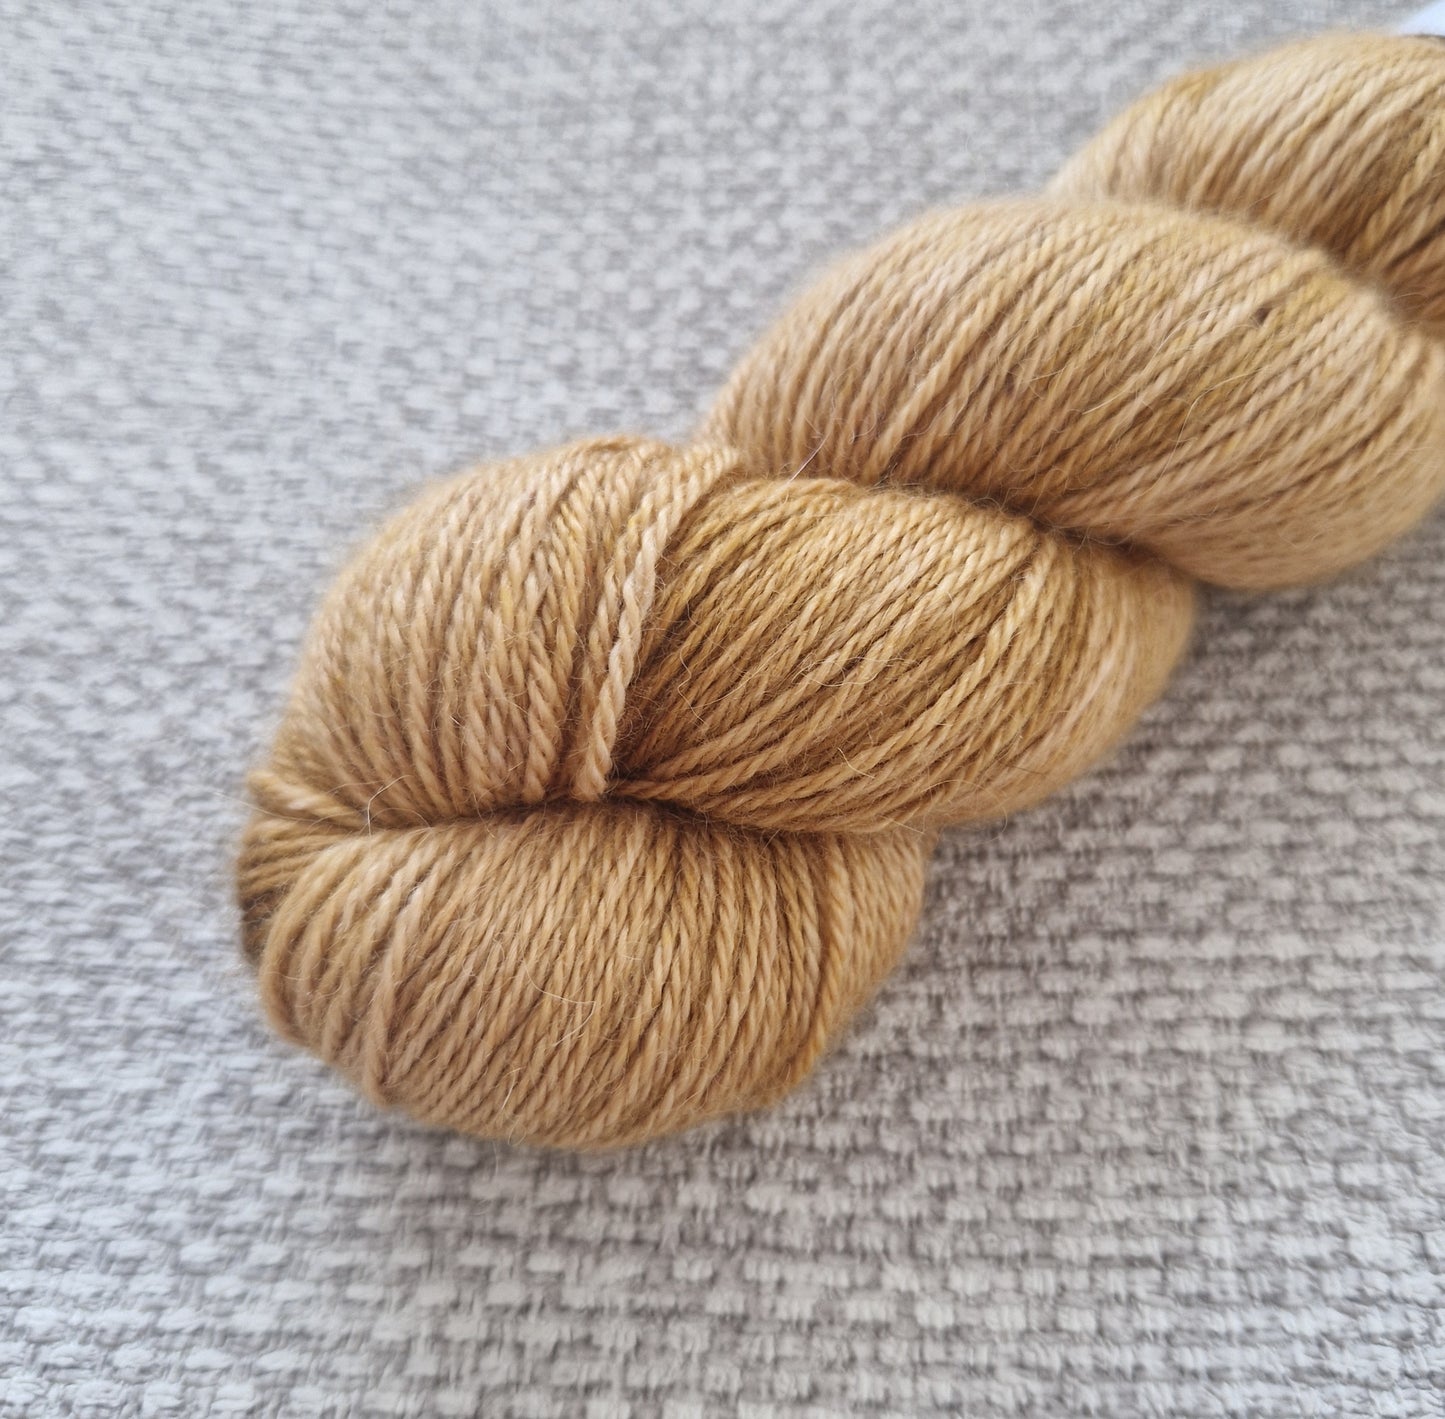 Biscuit - 4ply/Sock